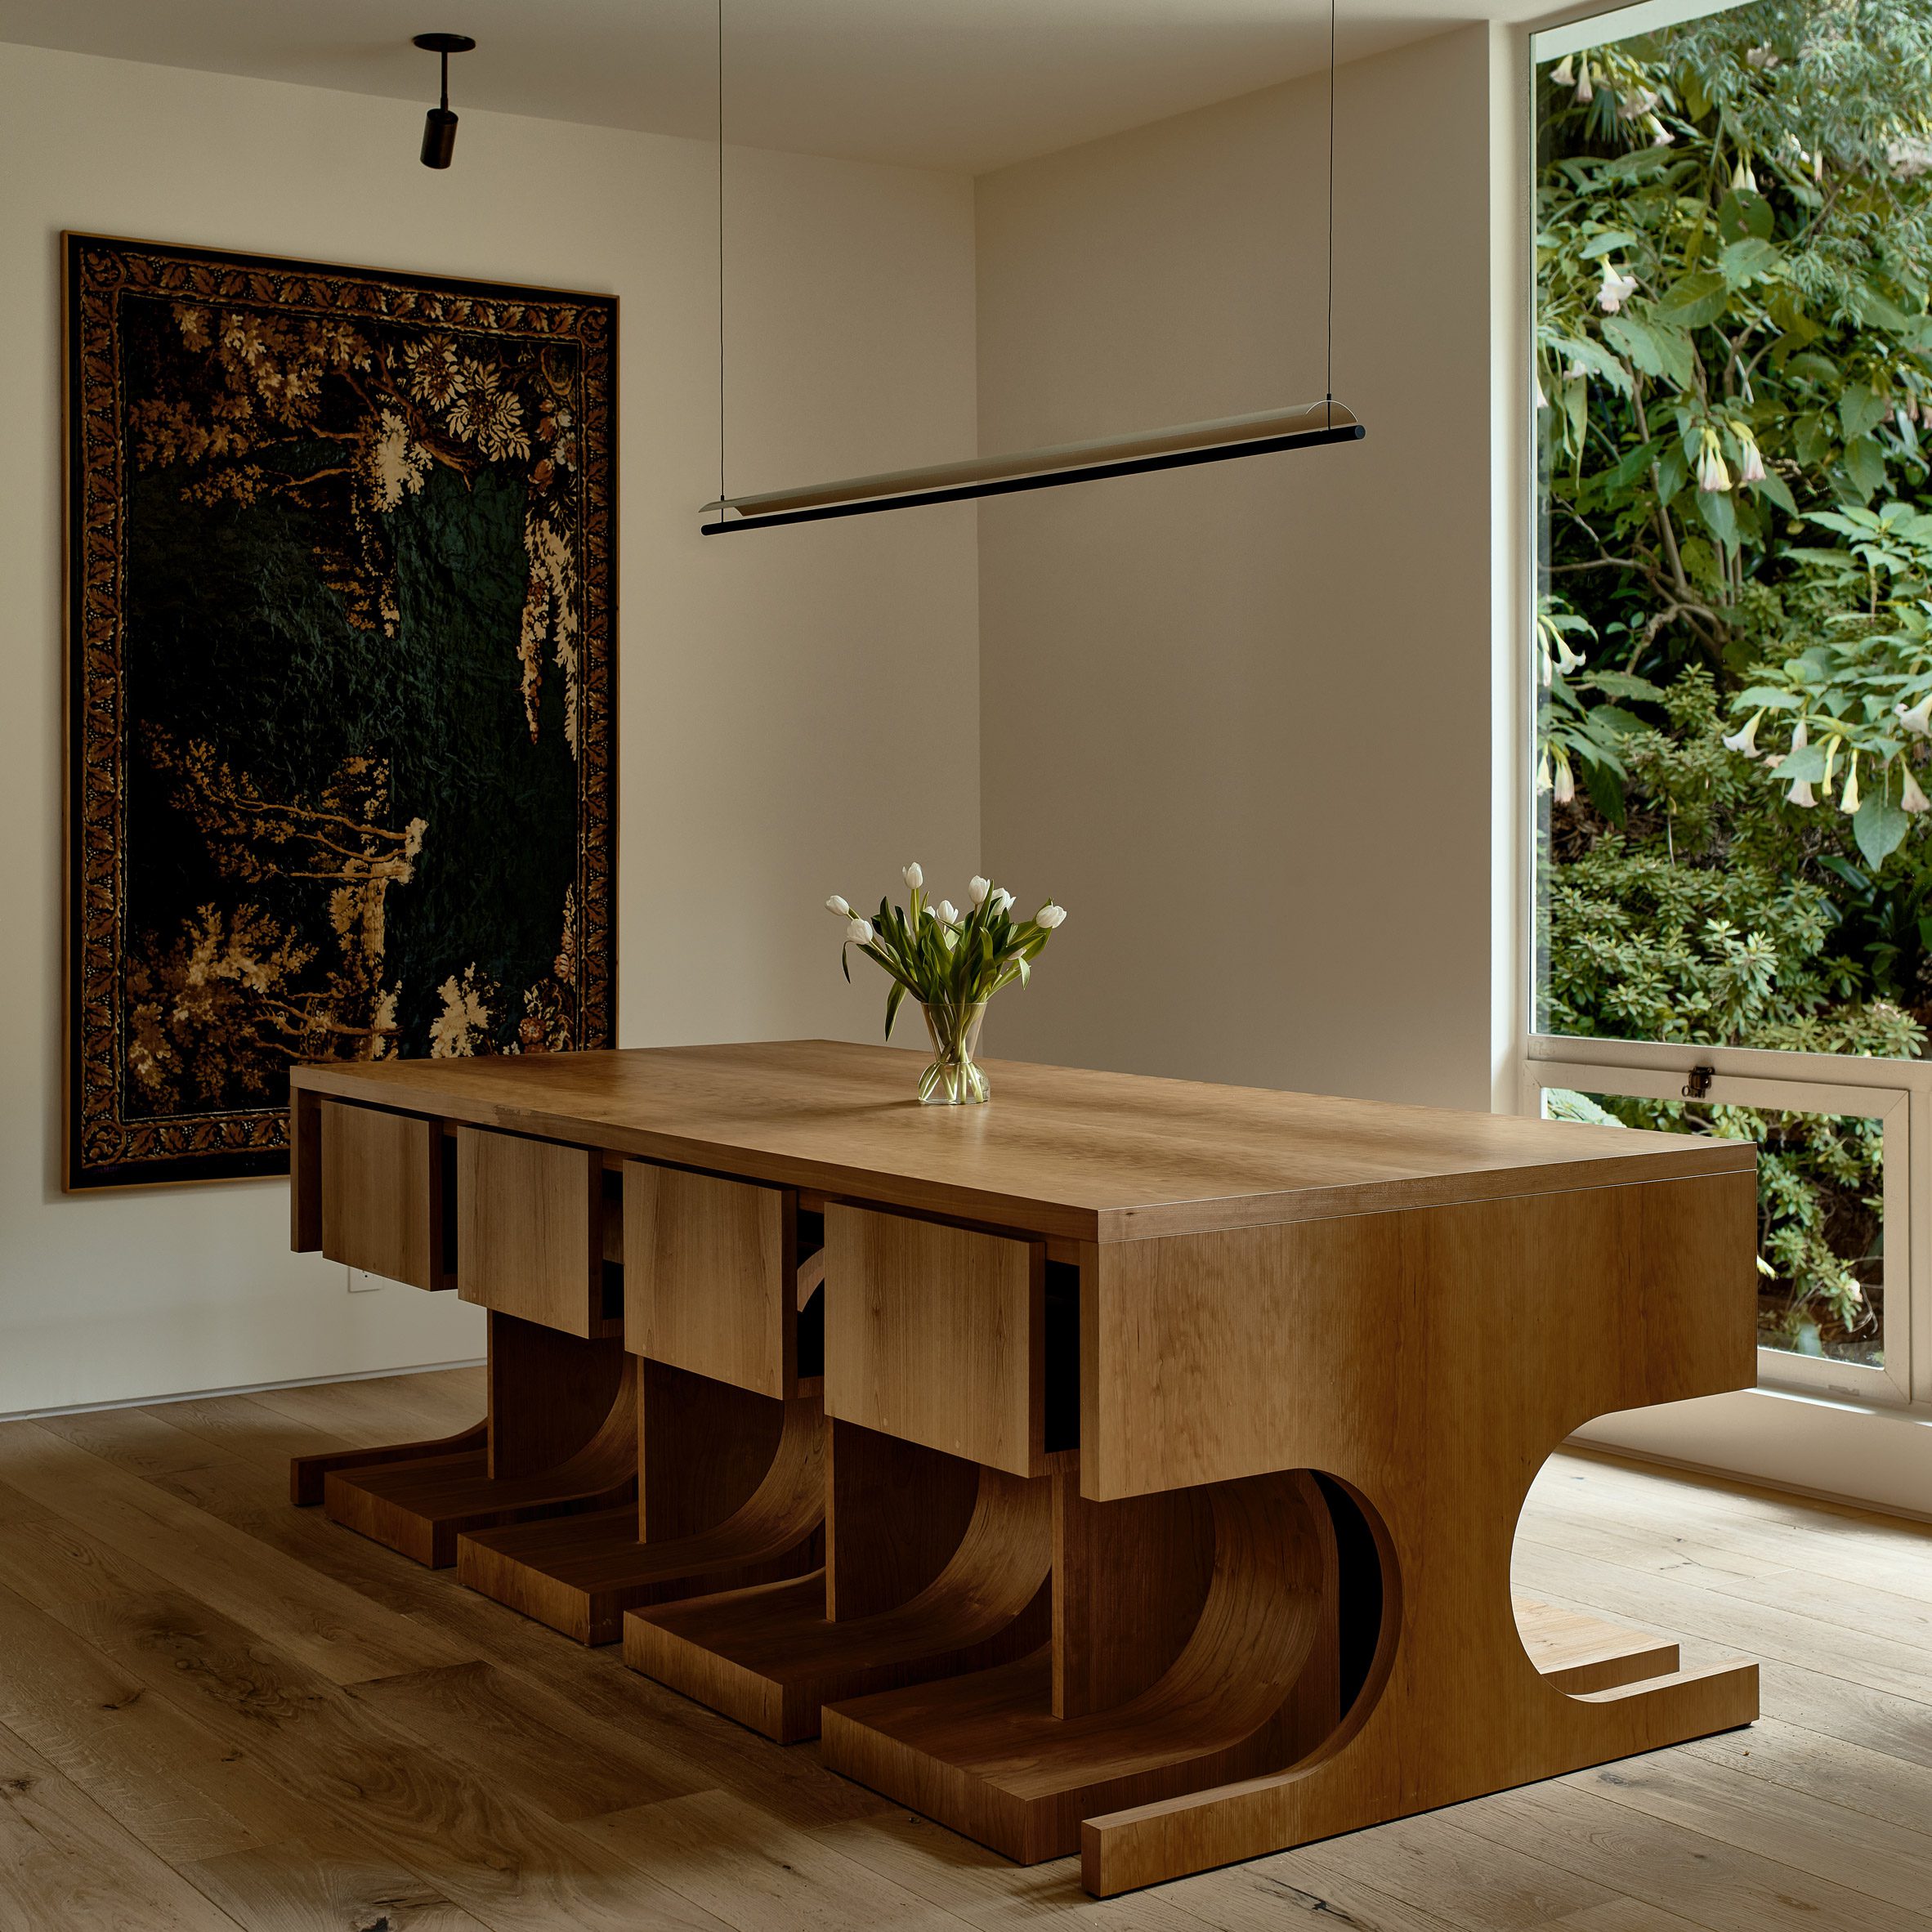 Wood dining table with chairs that tuck neatly underneath